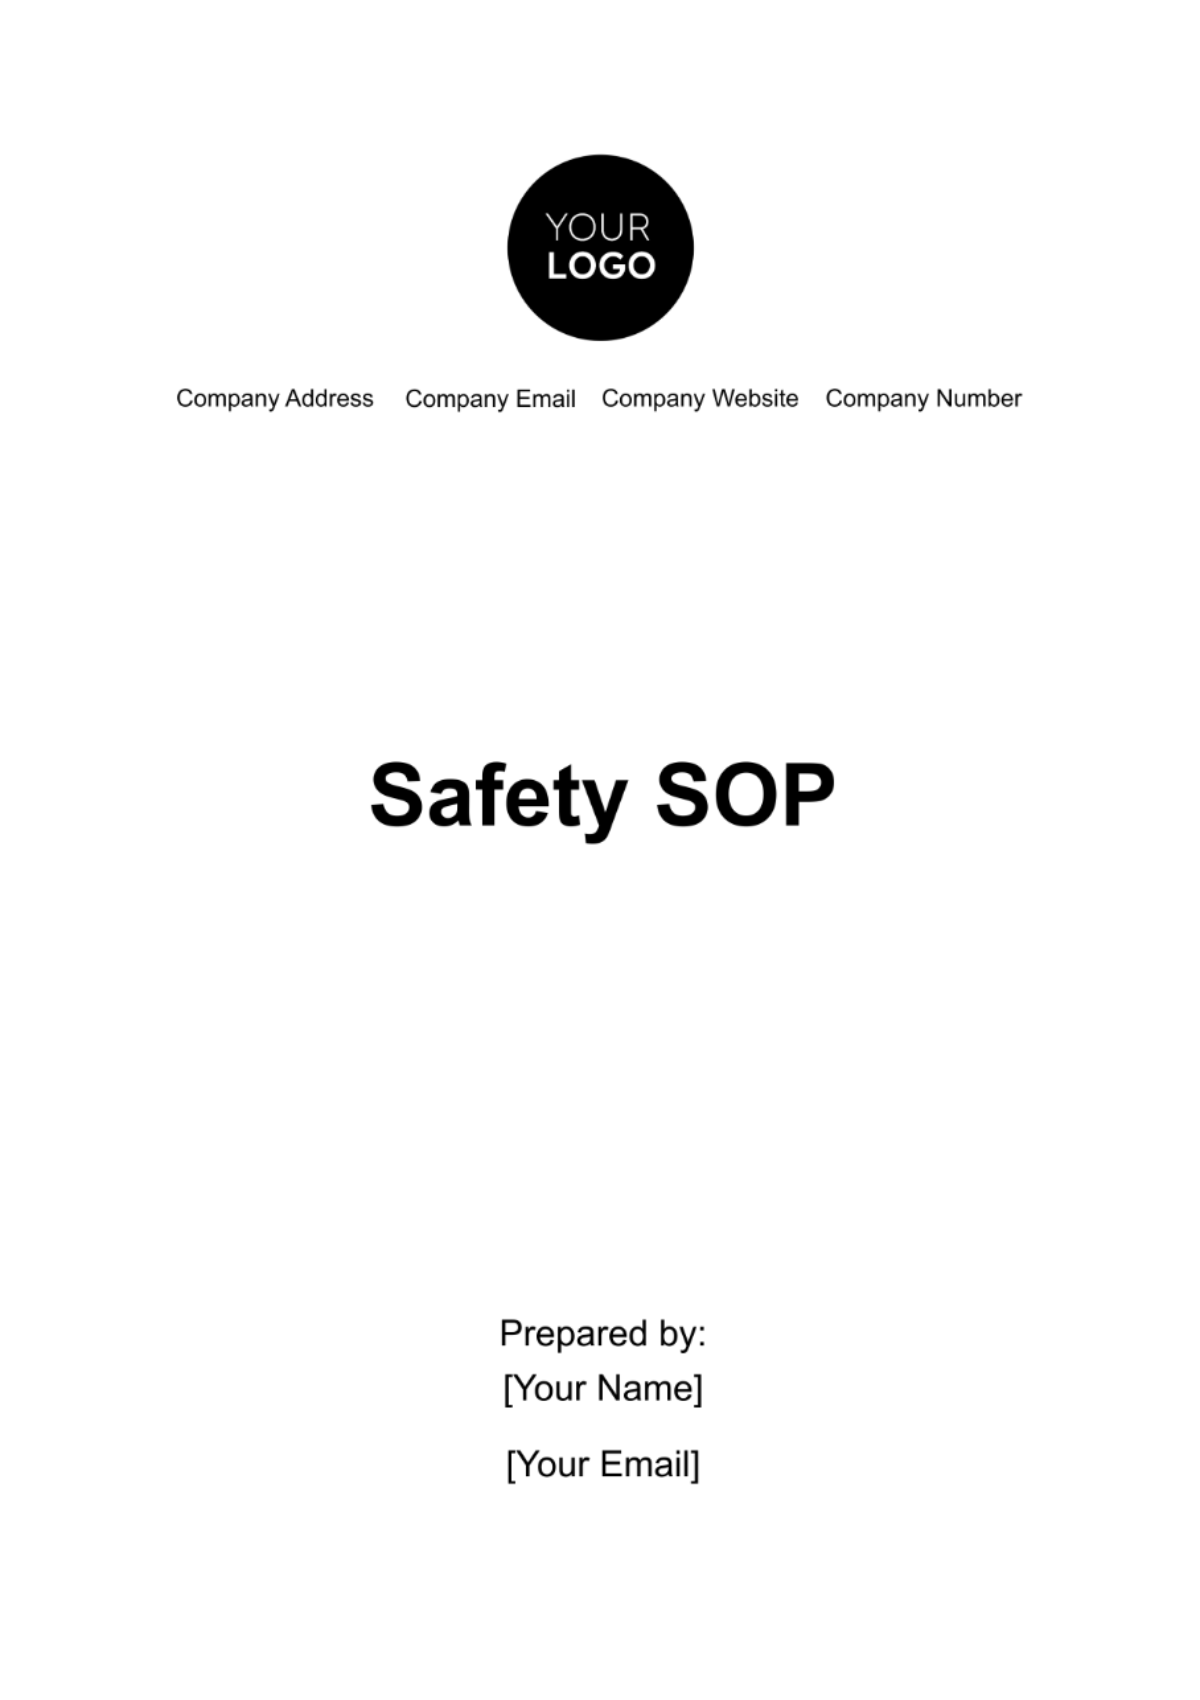 Safety SOP Template